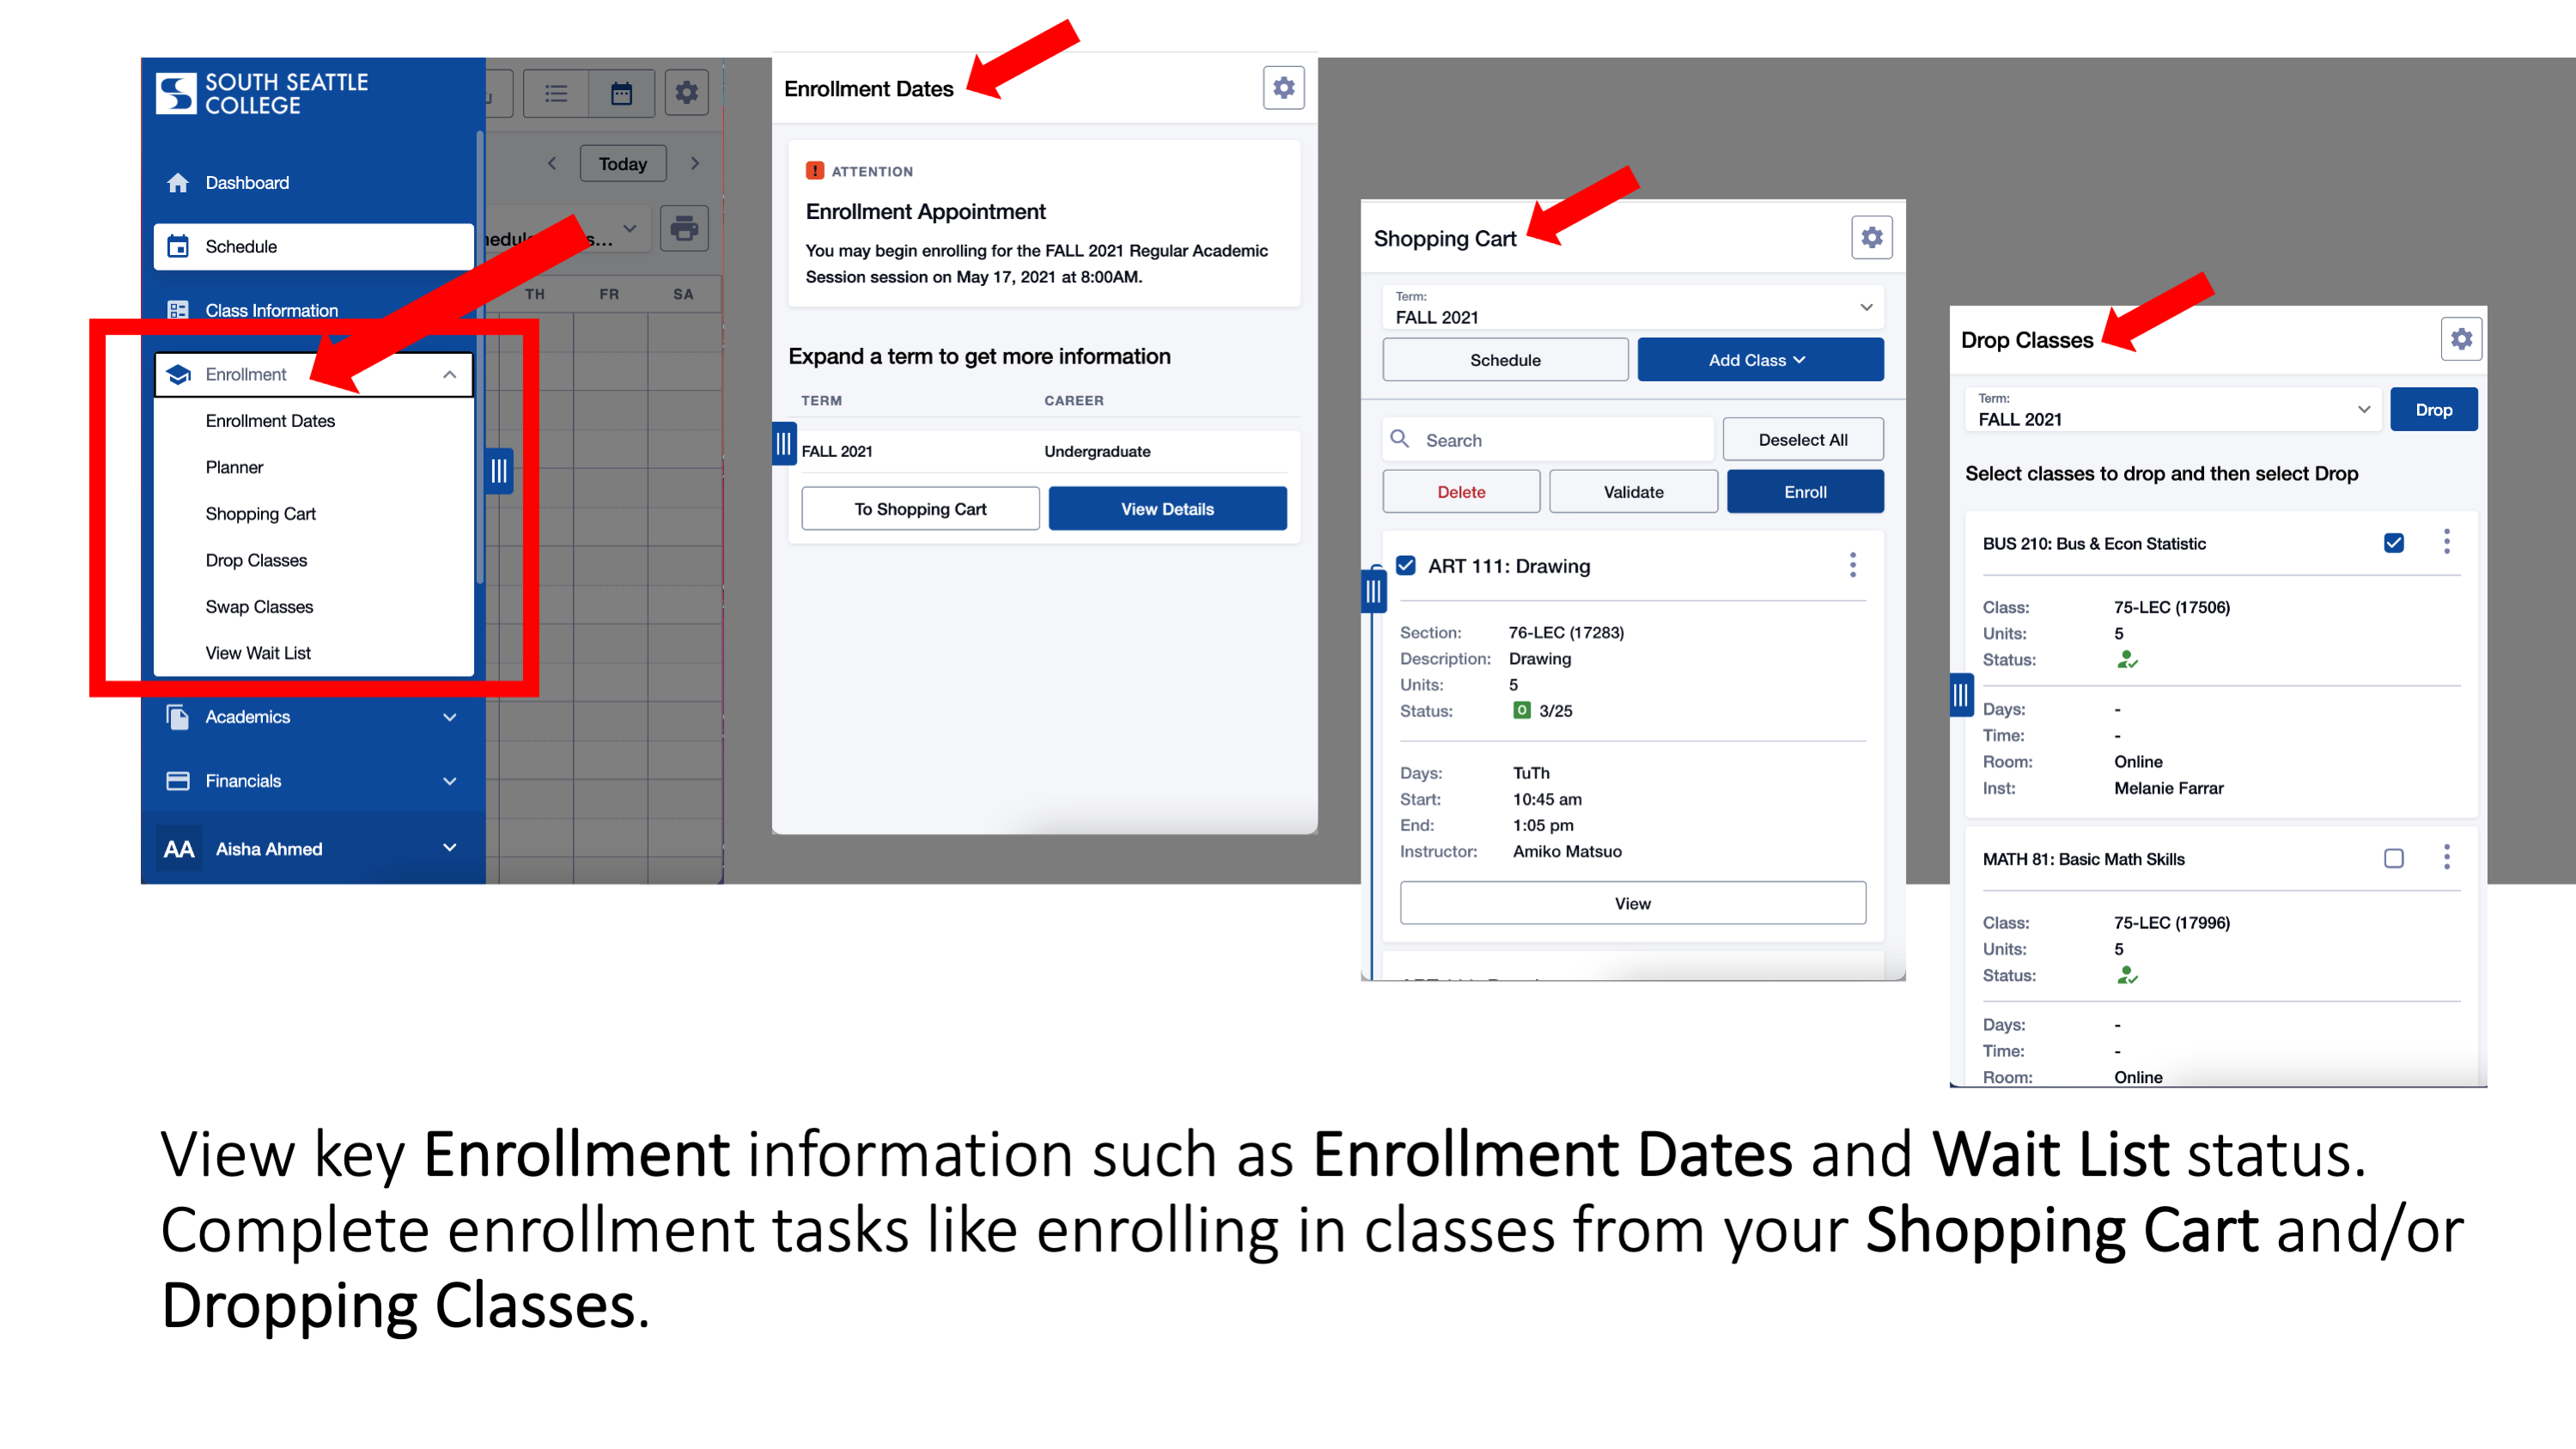 View key Enrollment information such as Enrollment Dates and Wait List status. Complete enrollment tasks like enrolling in classes from your Shopping Cart and/or Dropping Classes.